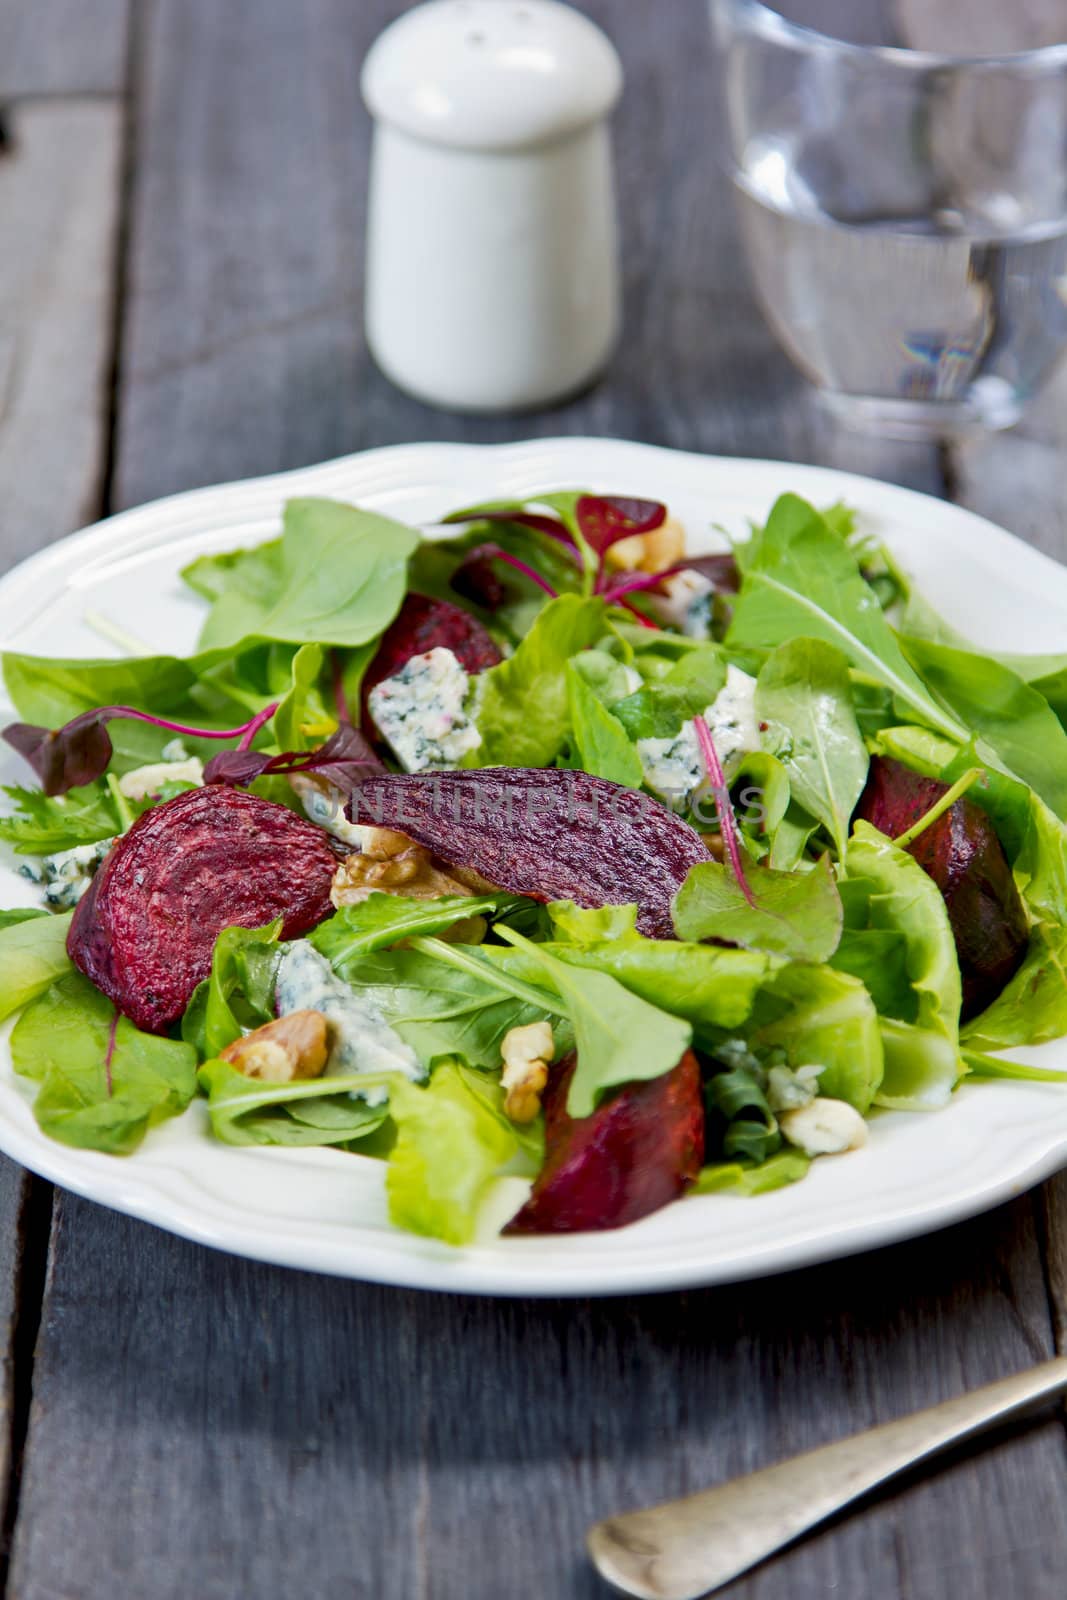 Roasted Beetroot with Blue cheese salad by vanillaechoes